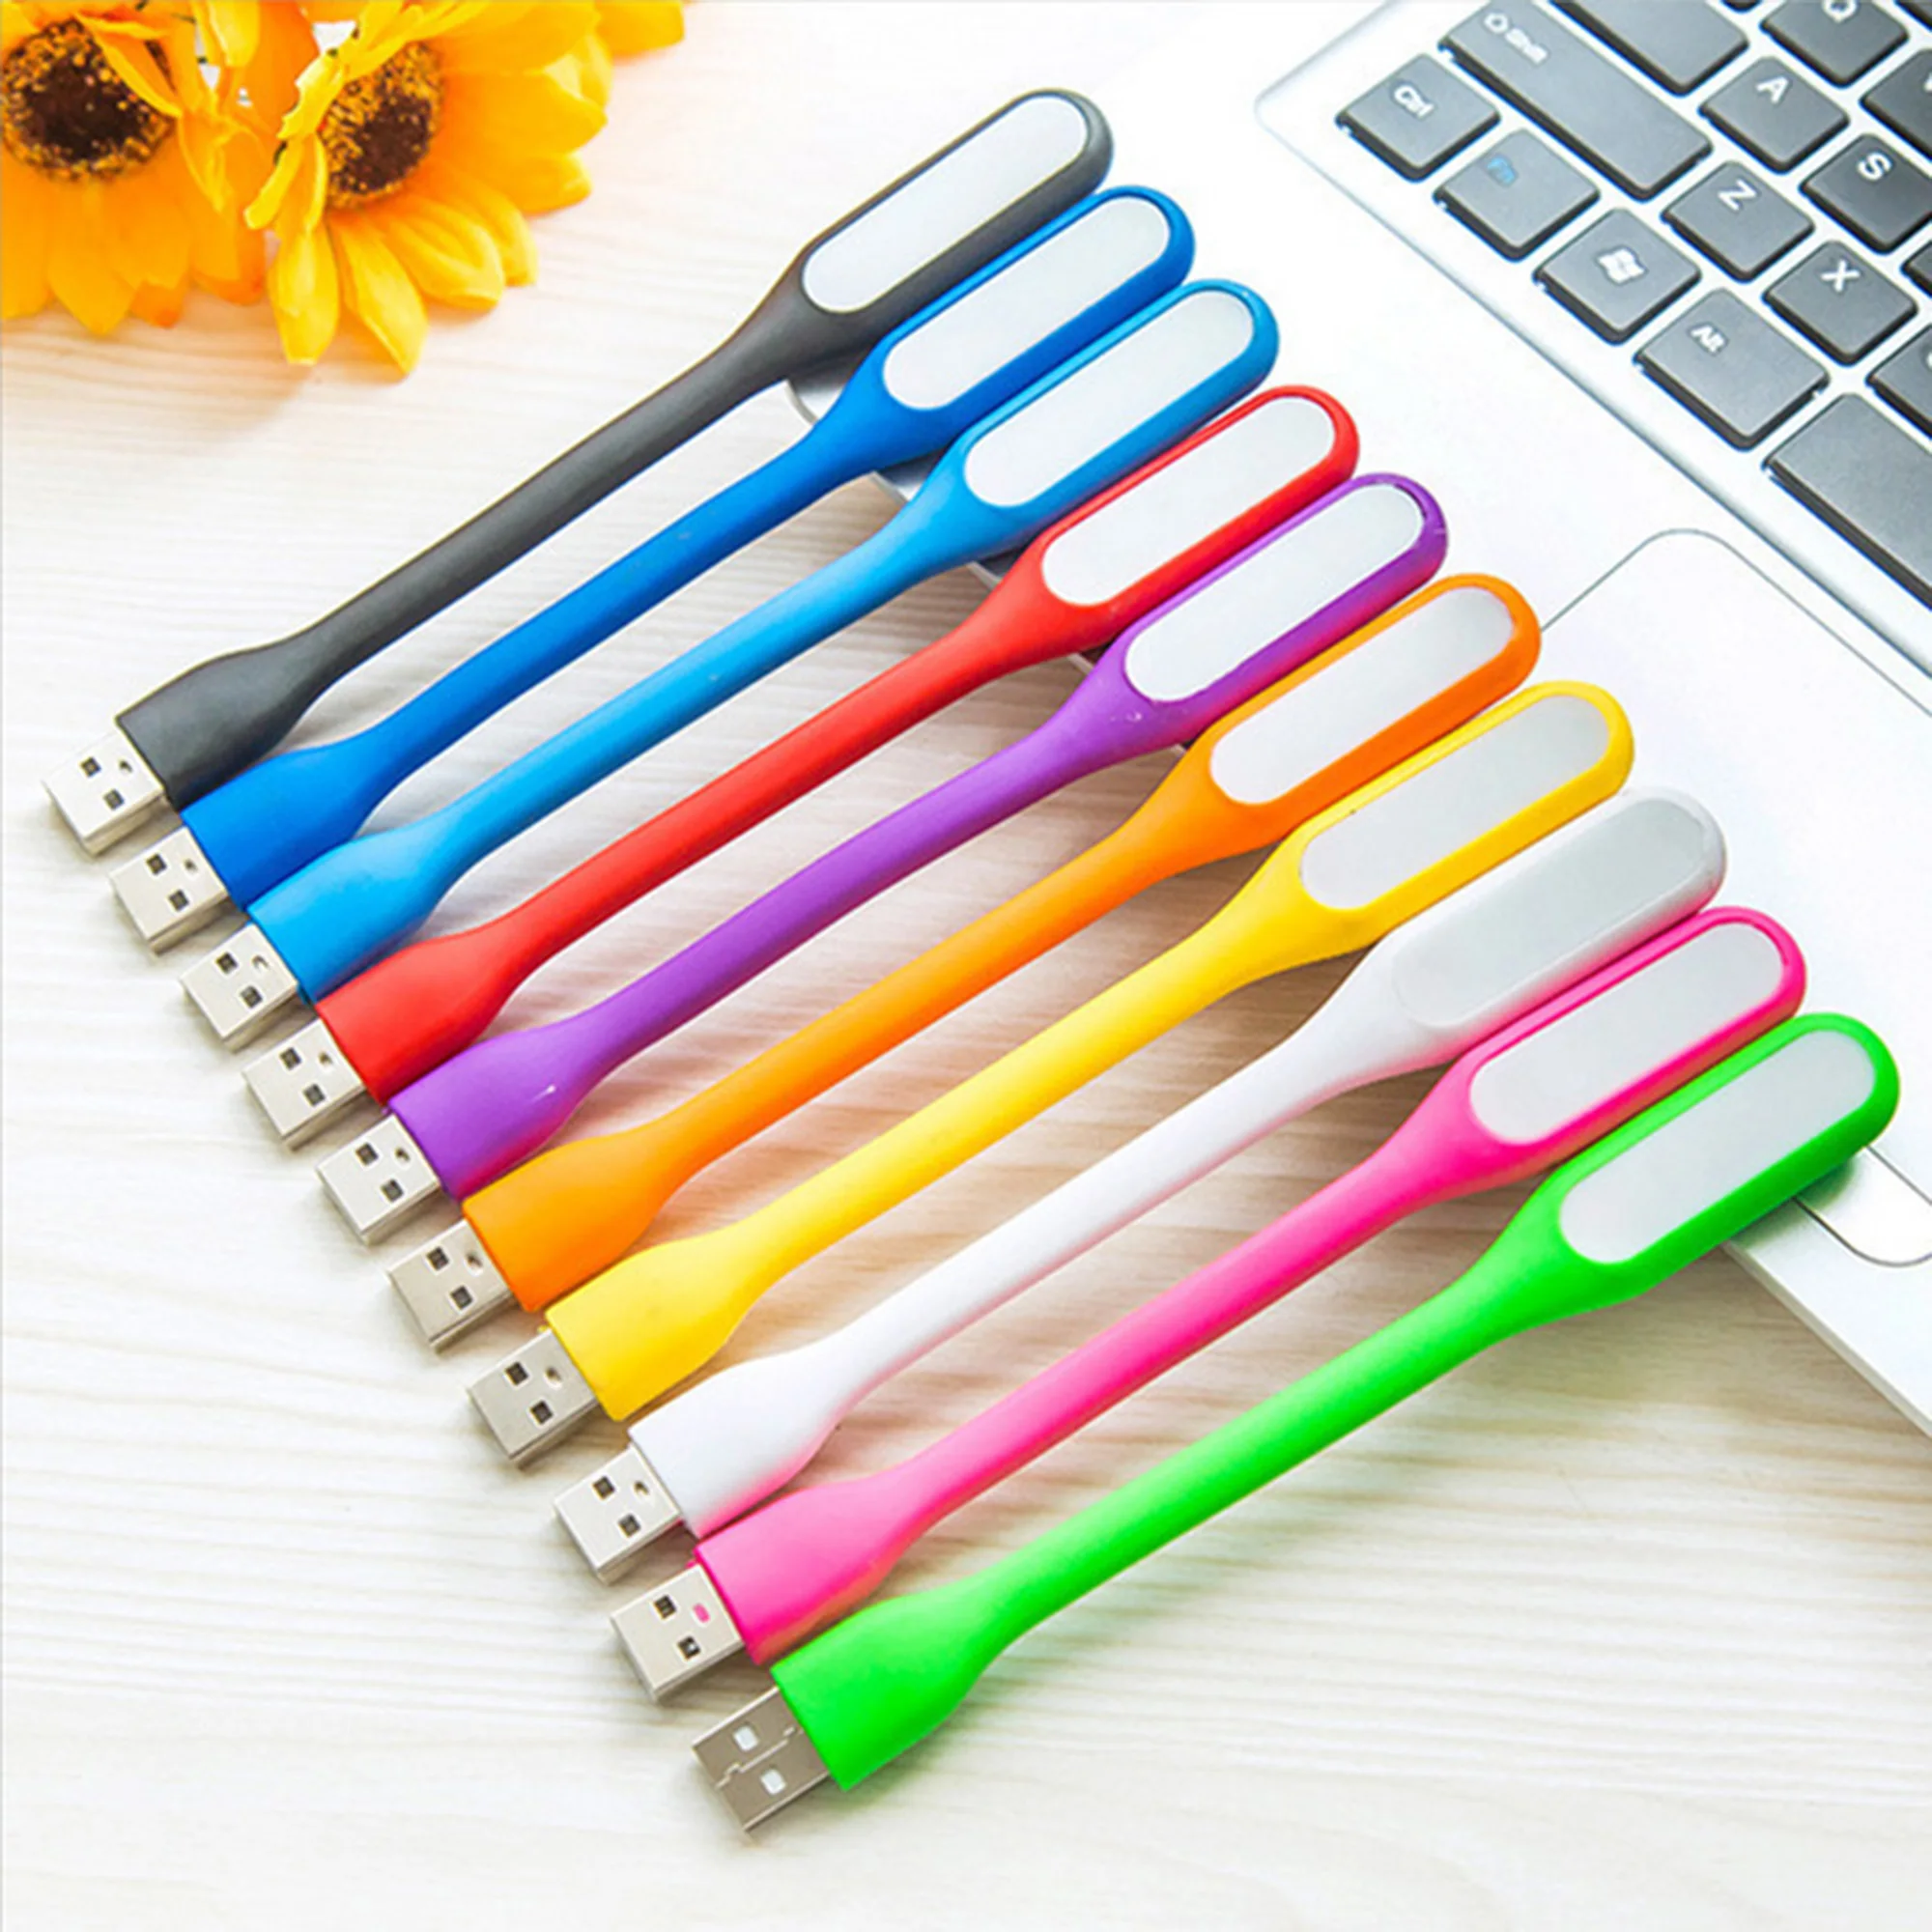 LED USB Lamp Light Power Bank Bendable Reading Lamp Computer USB Lights Gadgets Night Lights Computer Accessories Household Tool